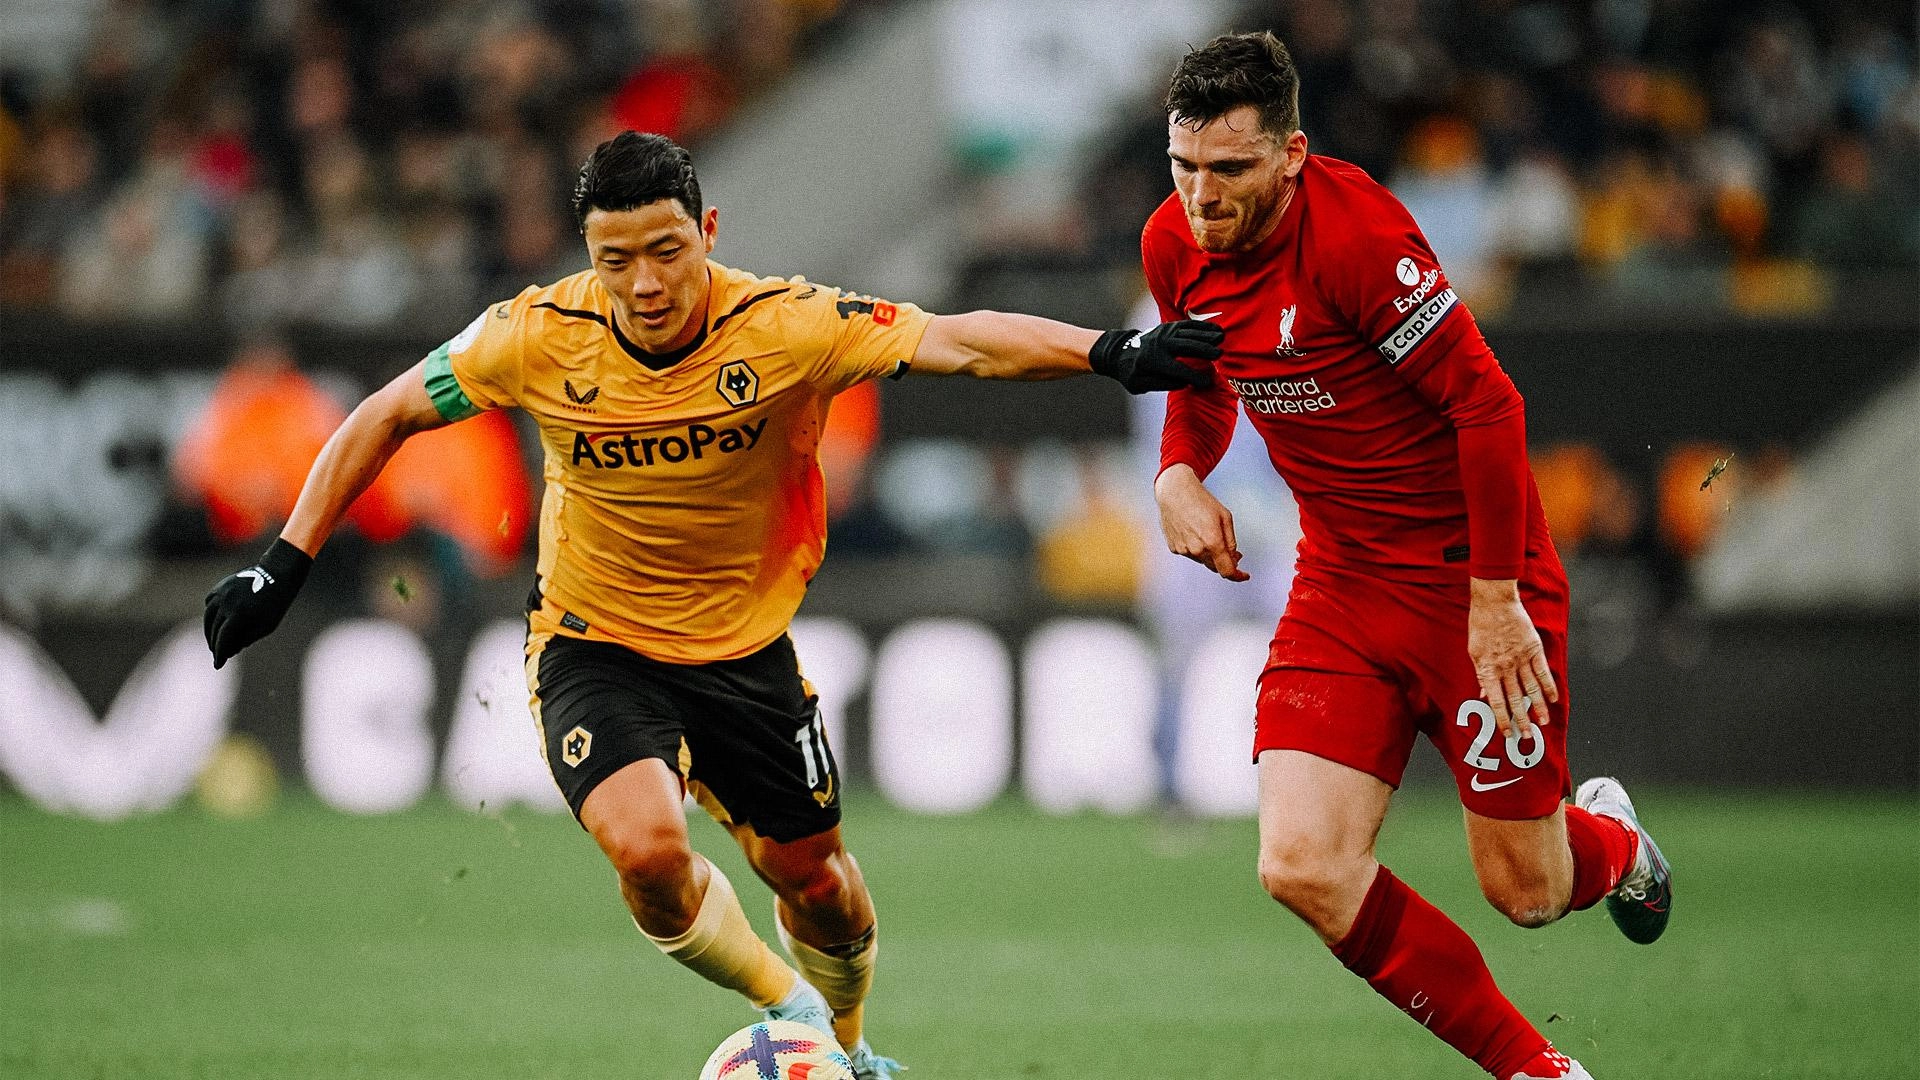 Wolves 3-0 Liverpool Watch match action